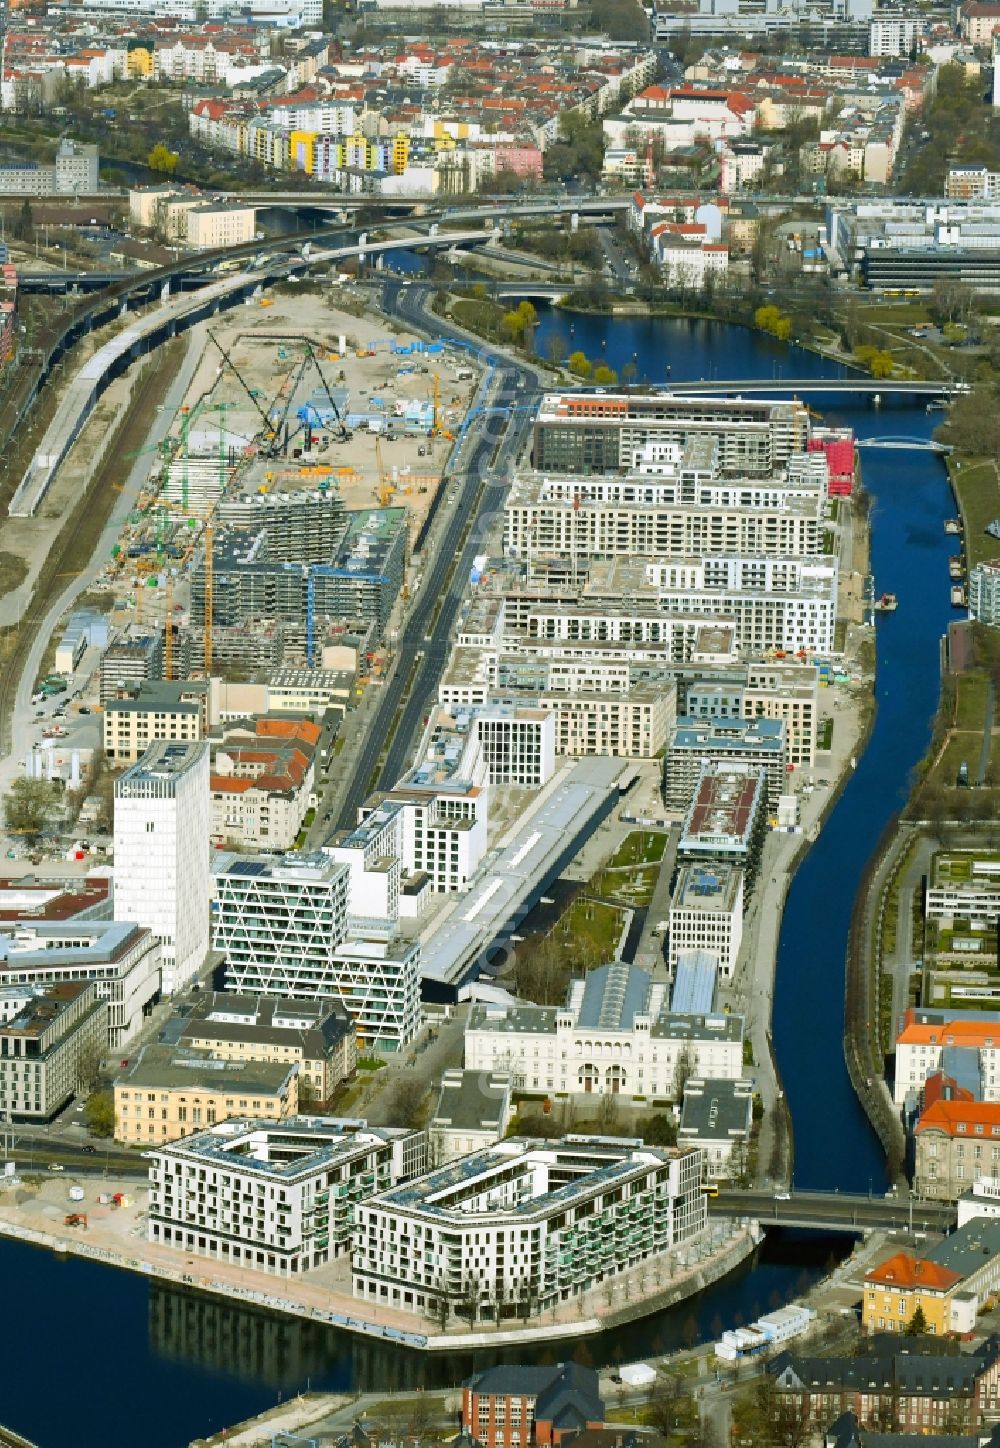 Berlin from above - Construction site to build a new multi-family residential complex on Invalidenstrasse on Humboldthafen in Berlin, Germany